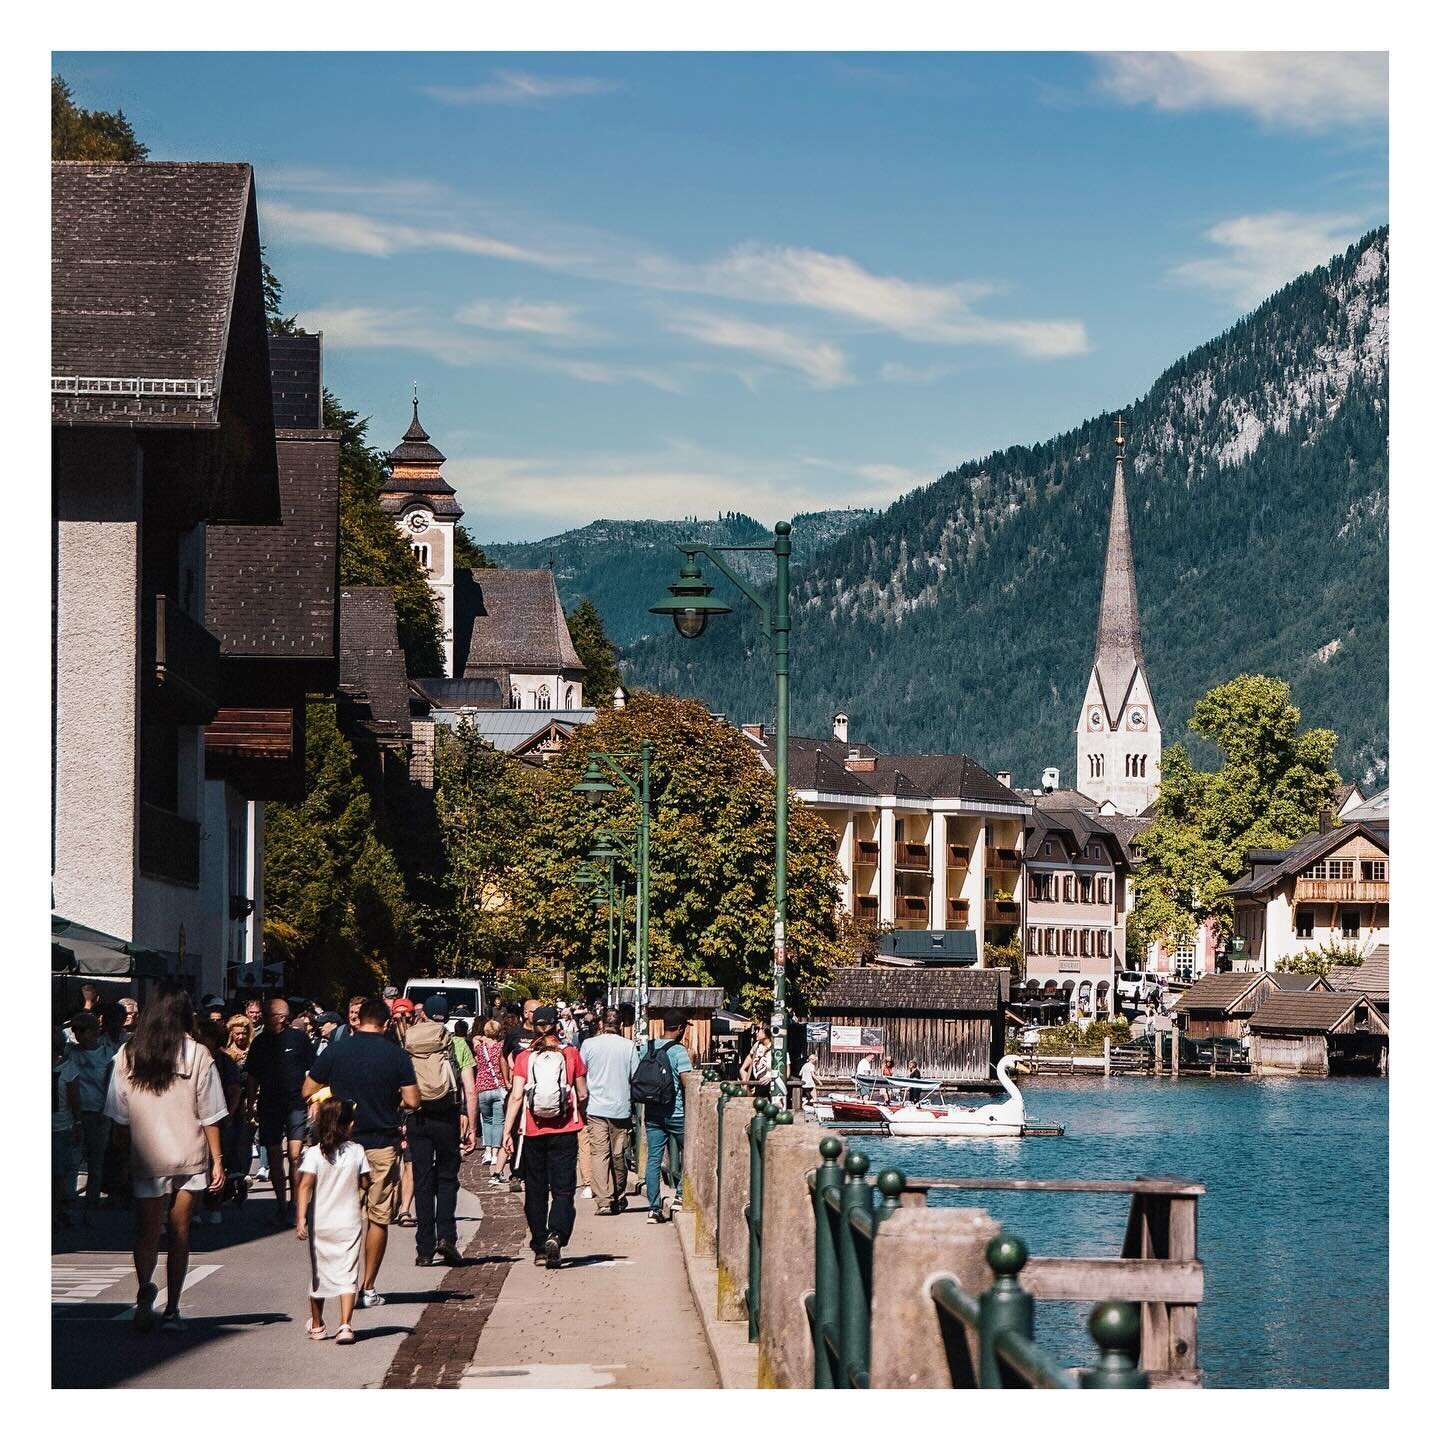 Crowded lake promenade in the UNESCO World Heritage Site Hallstatt at Lake Hallstatt during one of the last summer days. To the right you have a beautiful view of the lake while walking towards the main market square.

#landscape #hallstatt #photogra